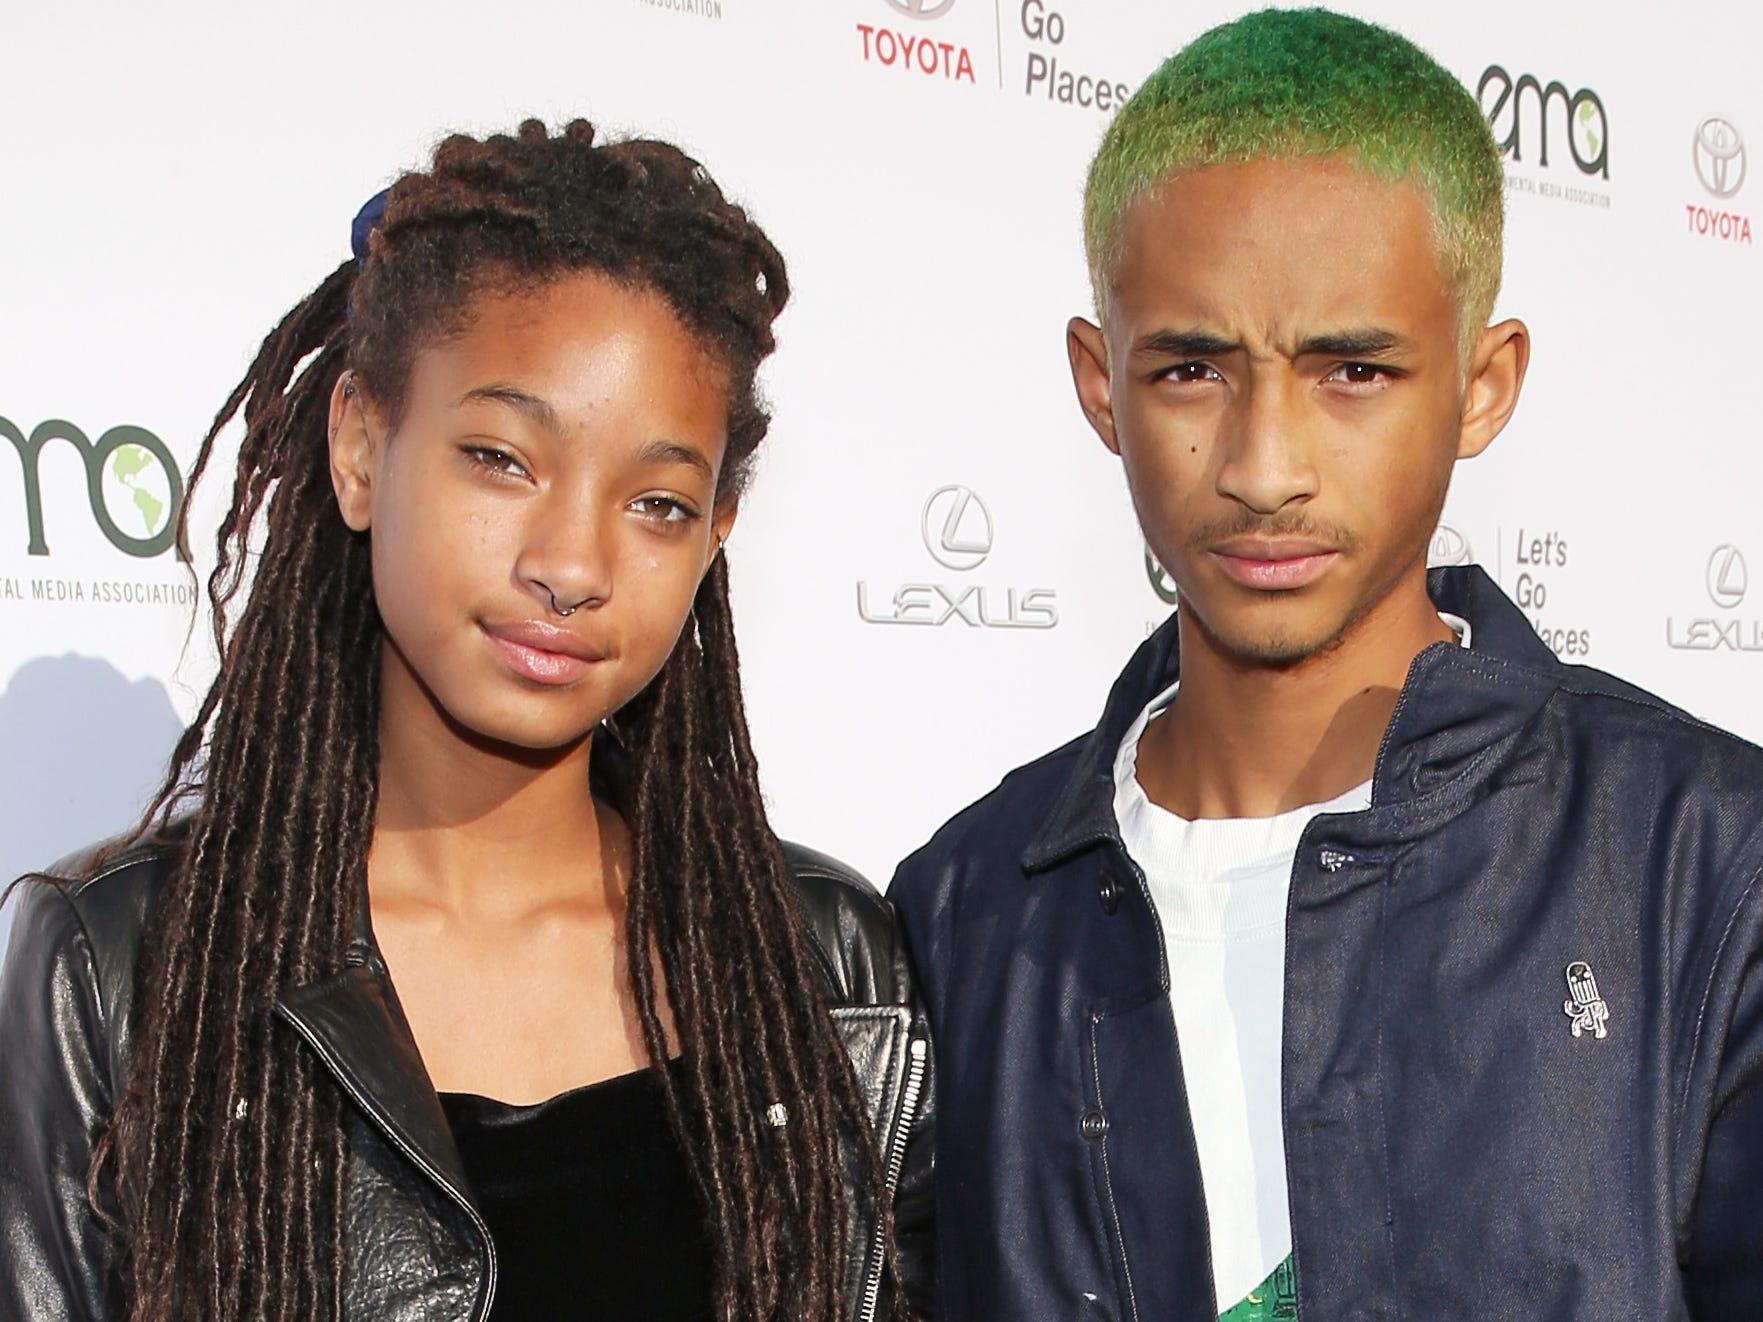 Willow-Smith-says-she-and-Jaden-Smith-felt-shunned-by-the-Black-community-for-being-too-different.jpg